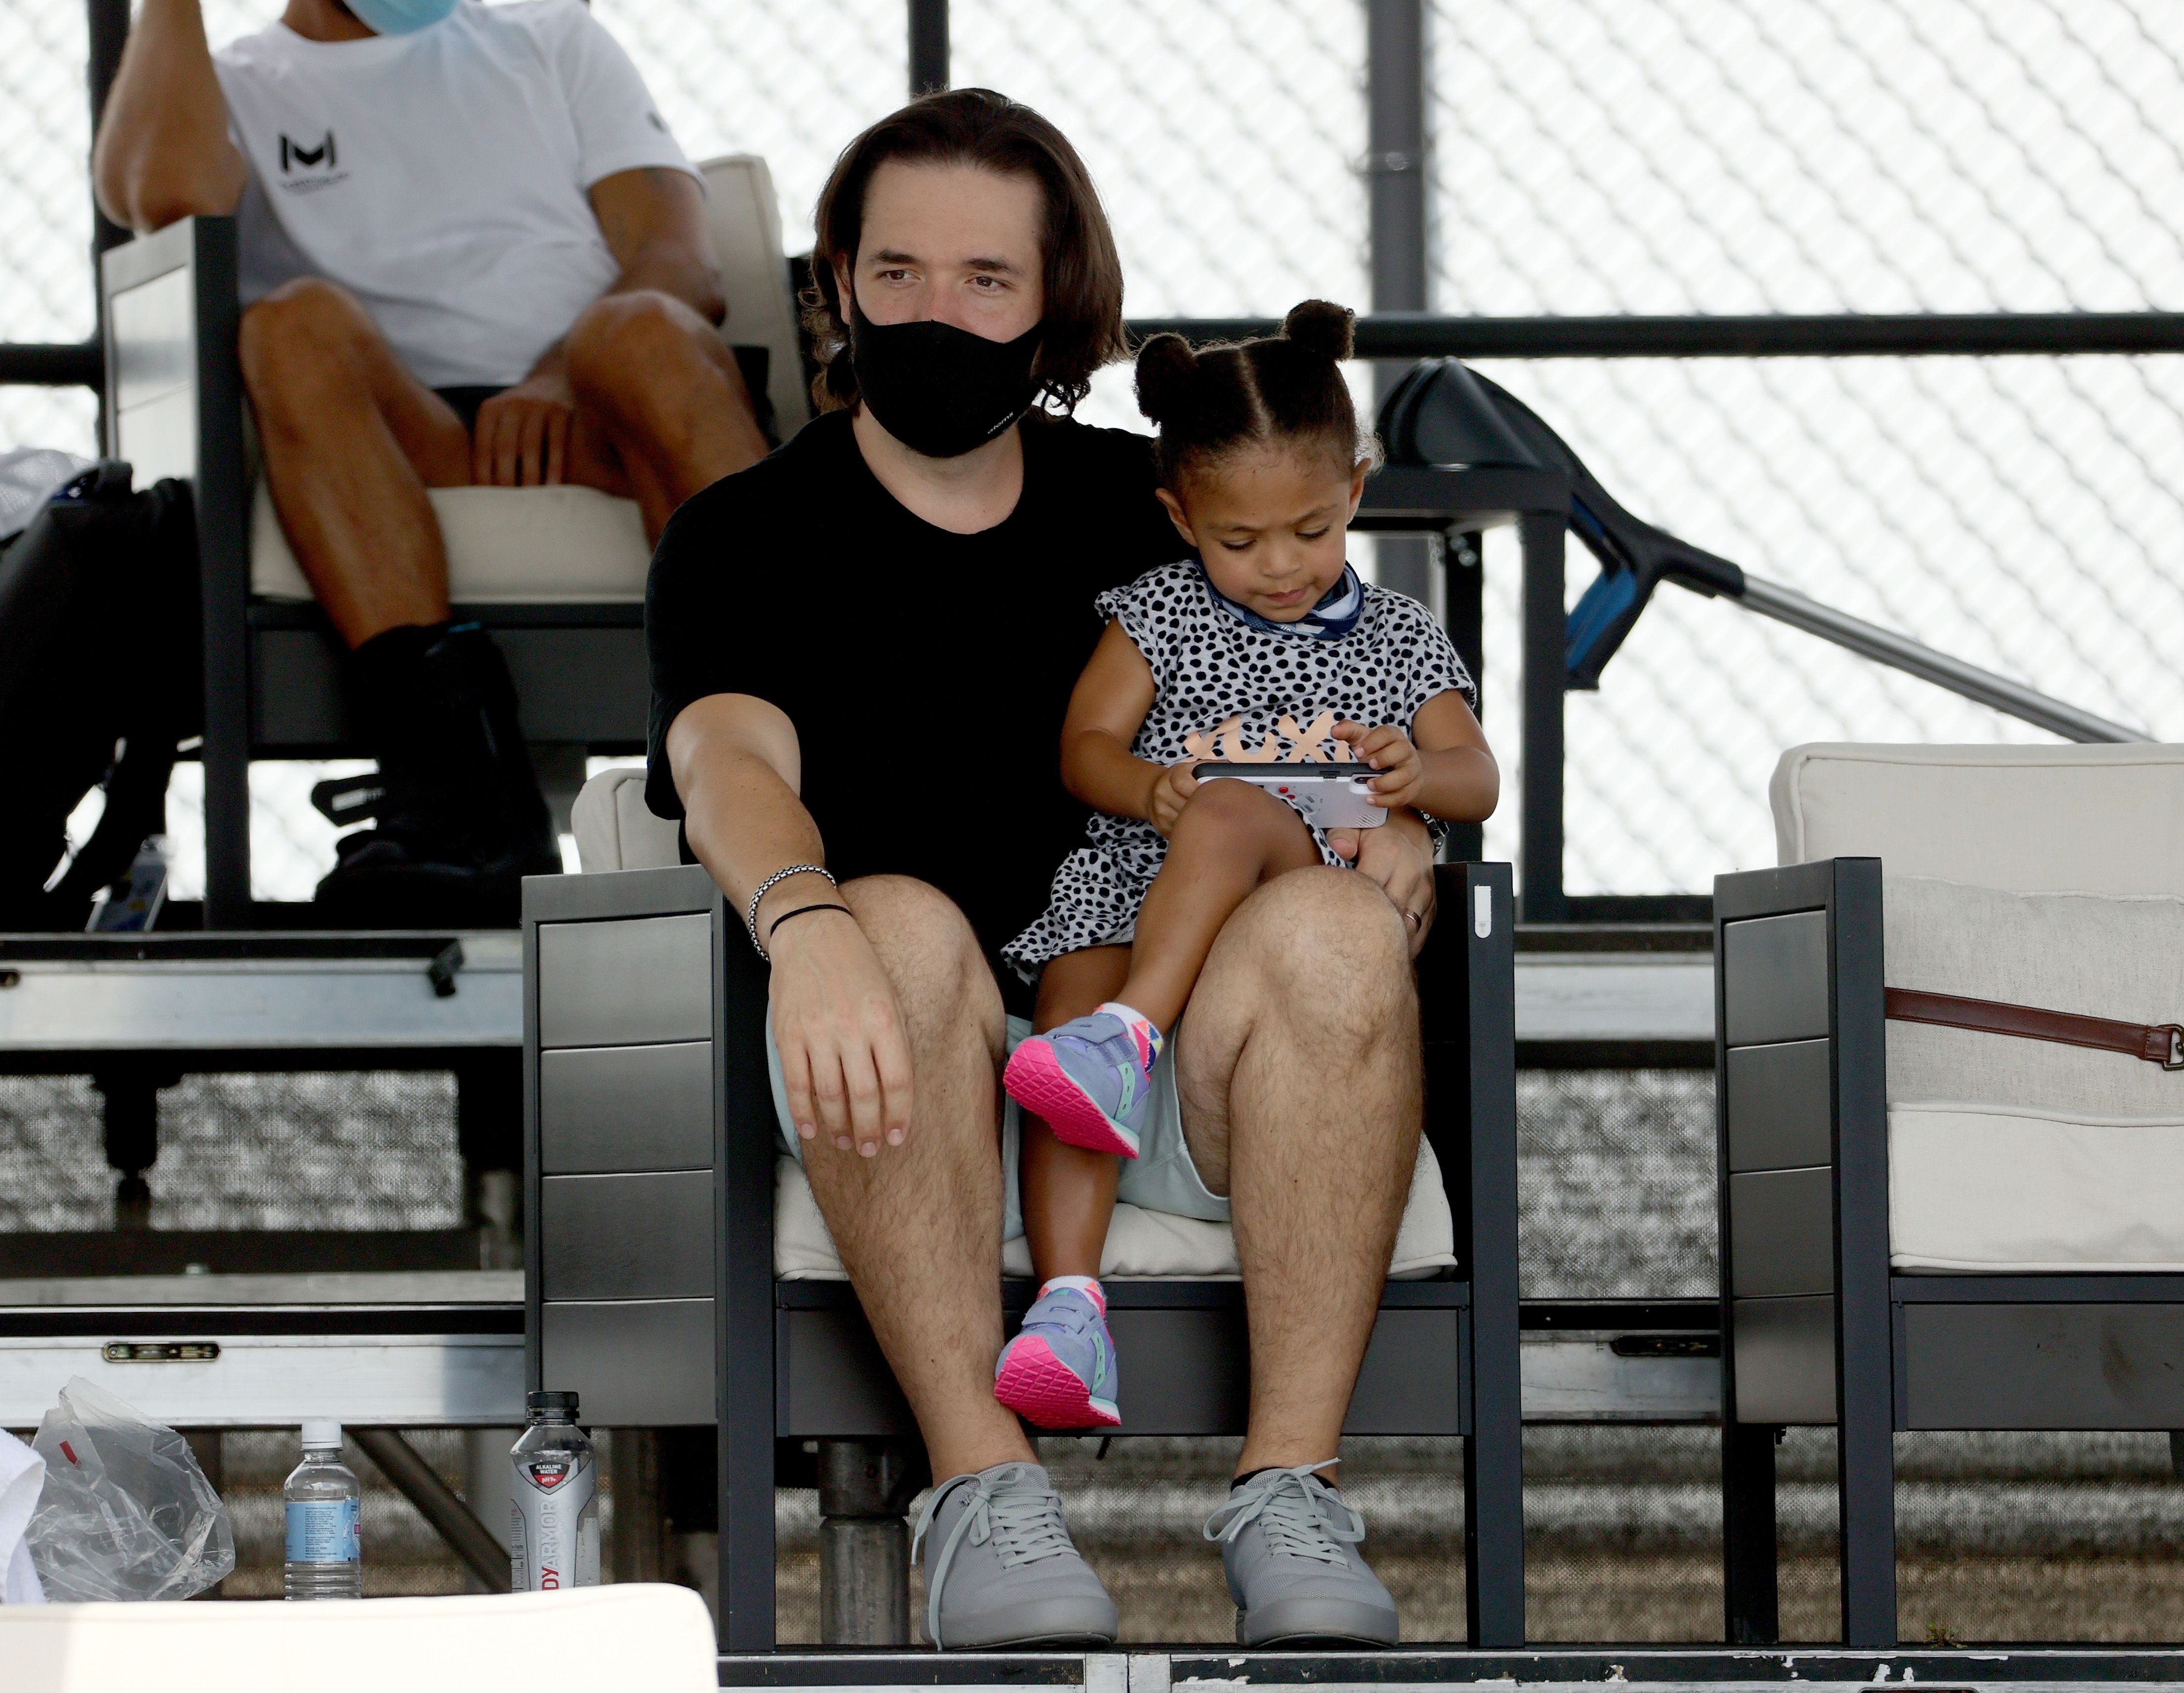 Alexis Ohanian and Alexis Olympia Ohanian, look on during the match between Serena Williams and Bernarda Pera in August 2020 | Photo: Getty Images